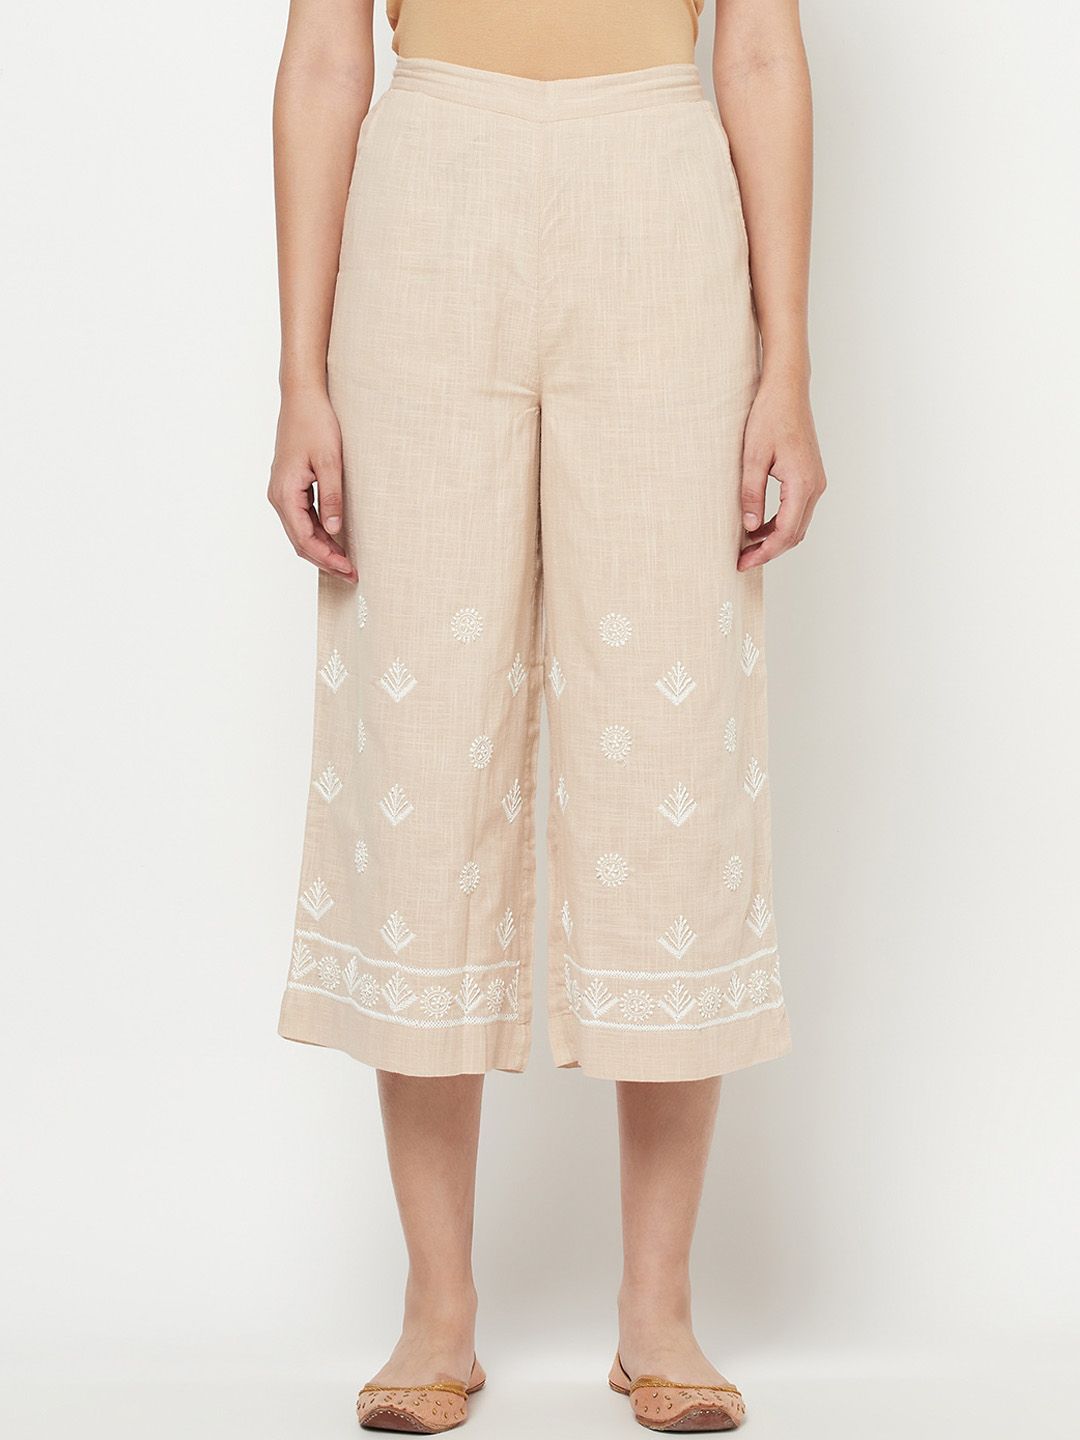 Fabindia Women Beige Ethnic Motifs Embroidered Cotton Cambric Cropped Culottes Price in India